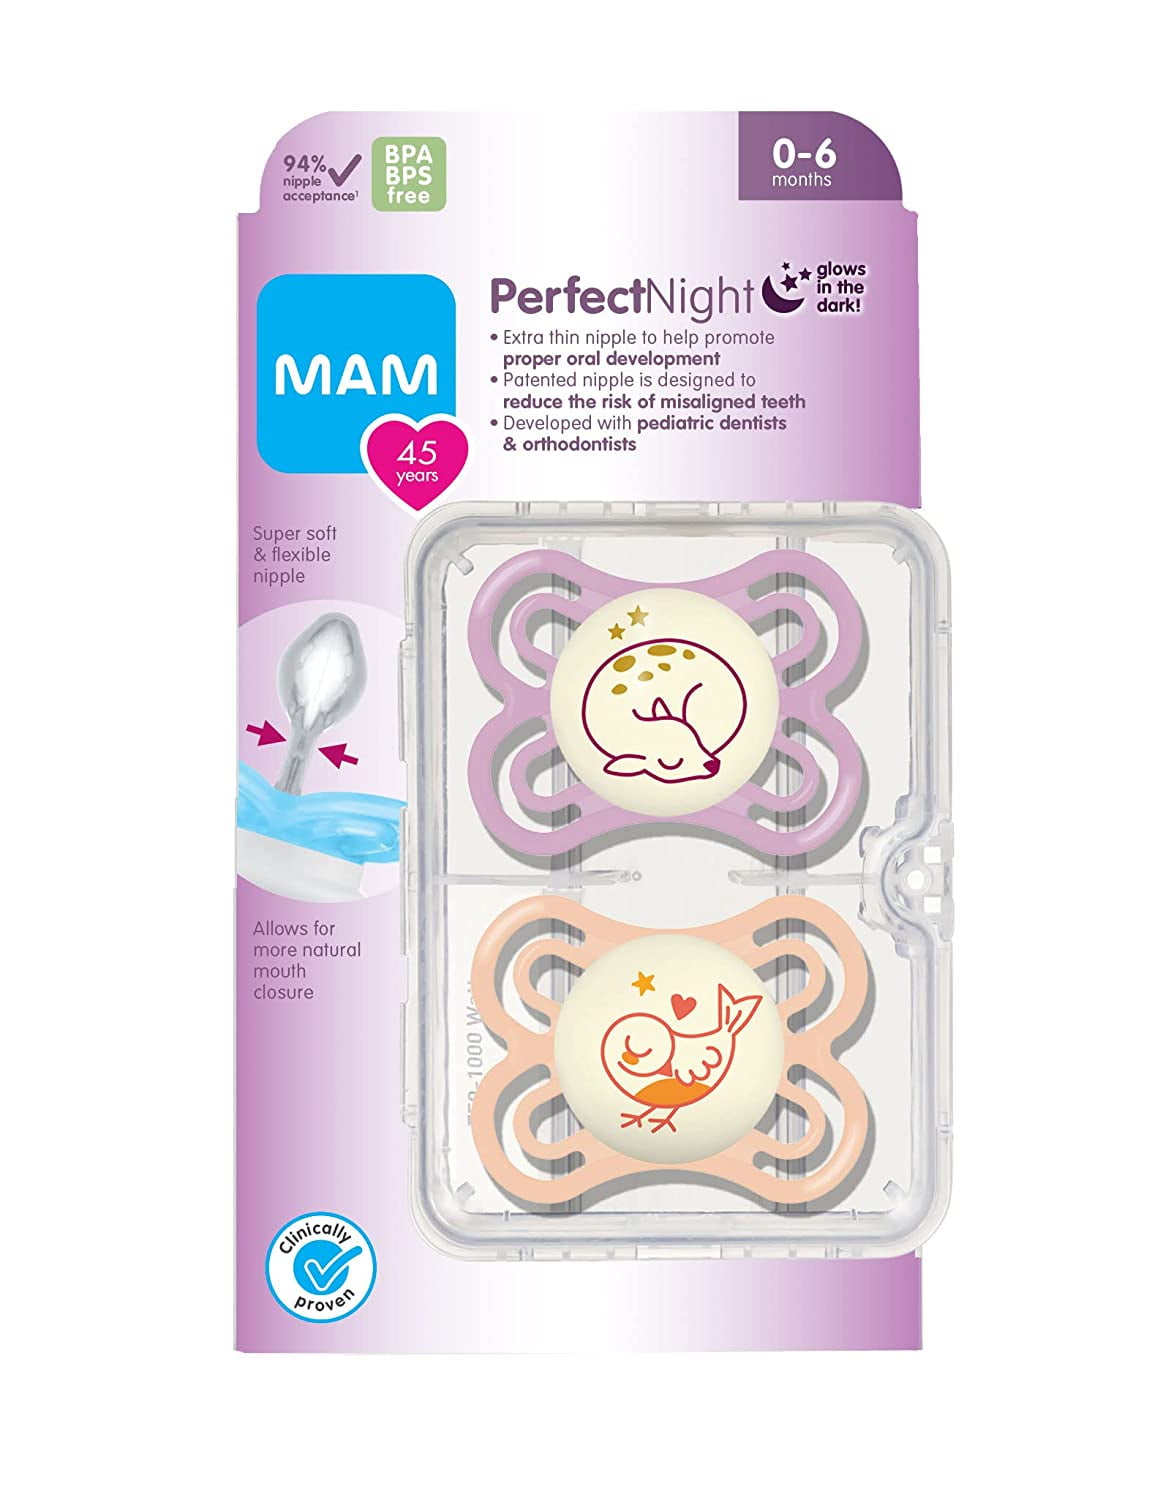 Buy MAM Perfect Night, silicone Boy 6-16 months cheaply